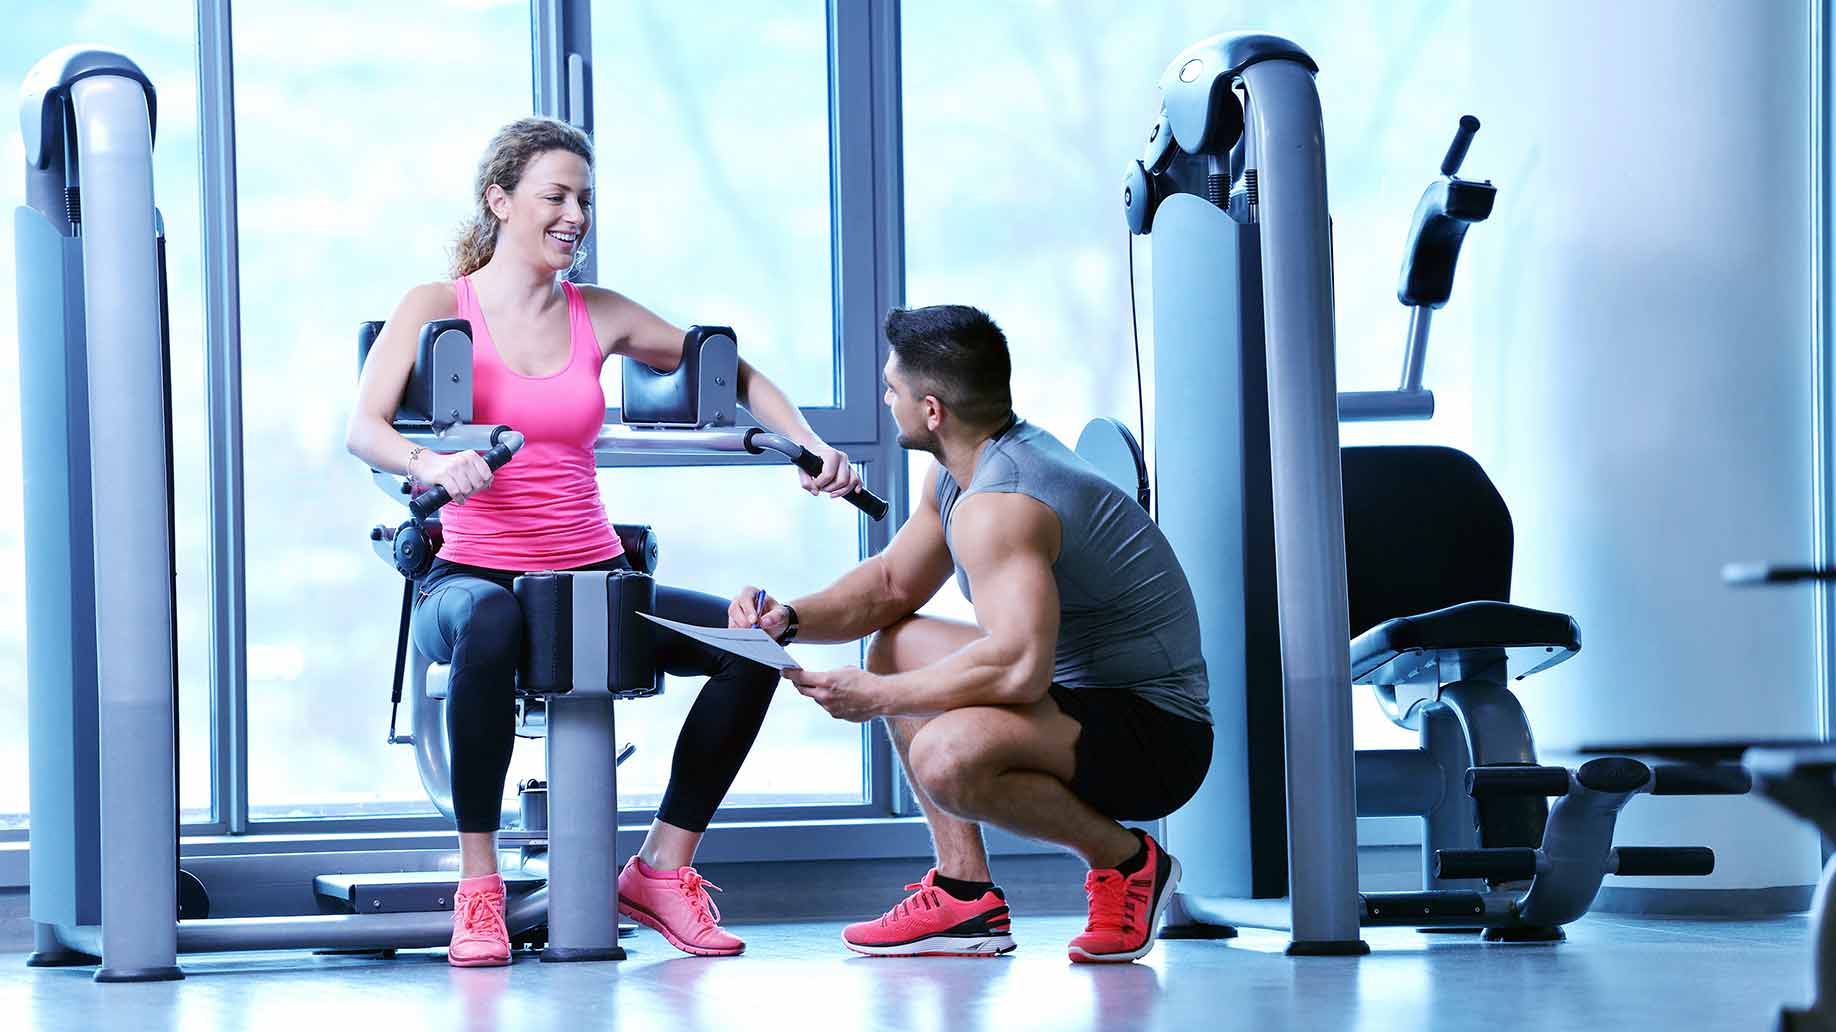 How Much Does a Personal Fitness Trainer Cost - Prices